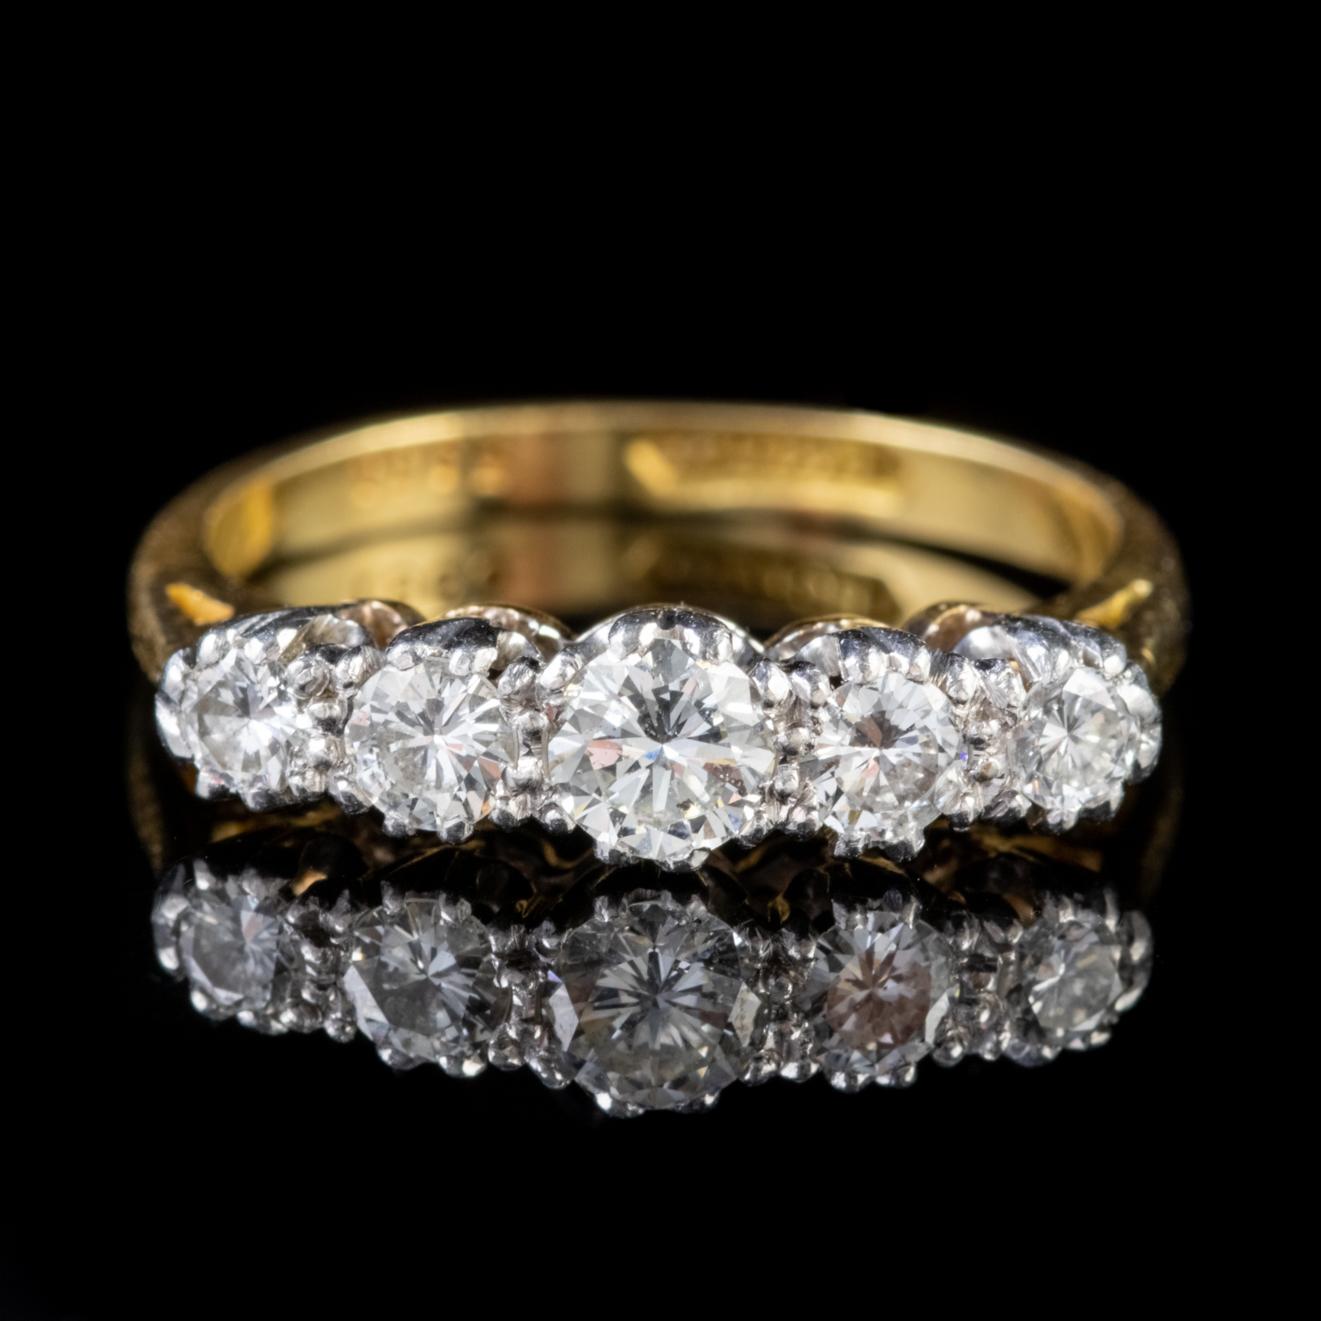 A stunning Antique Edwardian ring lined with five sparkling round brilliant cut Diamonds claw set in a Platinum mount which is fitted to an 18ct Yellow Gold shank. 

Diamonds are a stone of perfection. Their exceptional lustre and brilliant fire